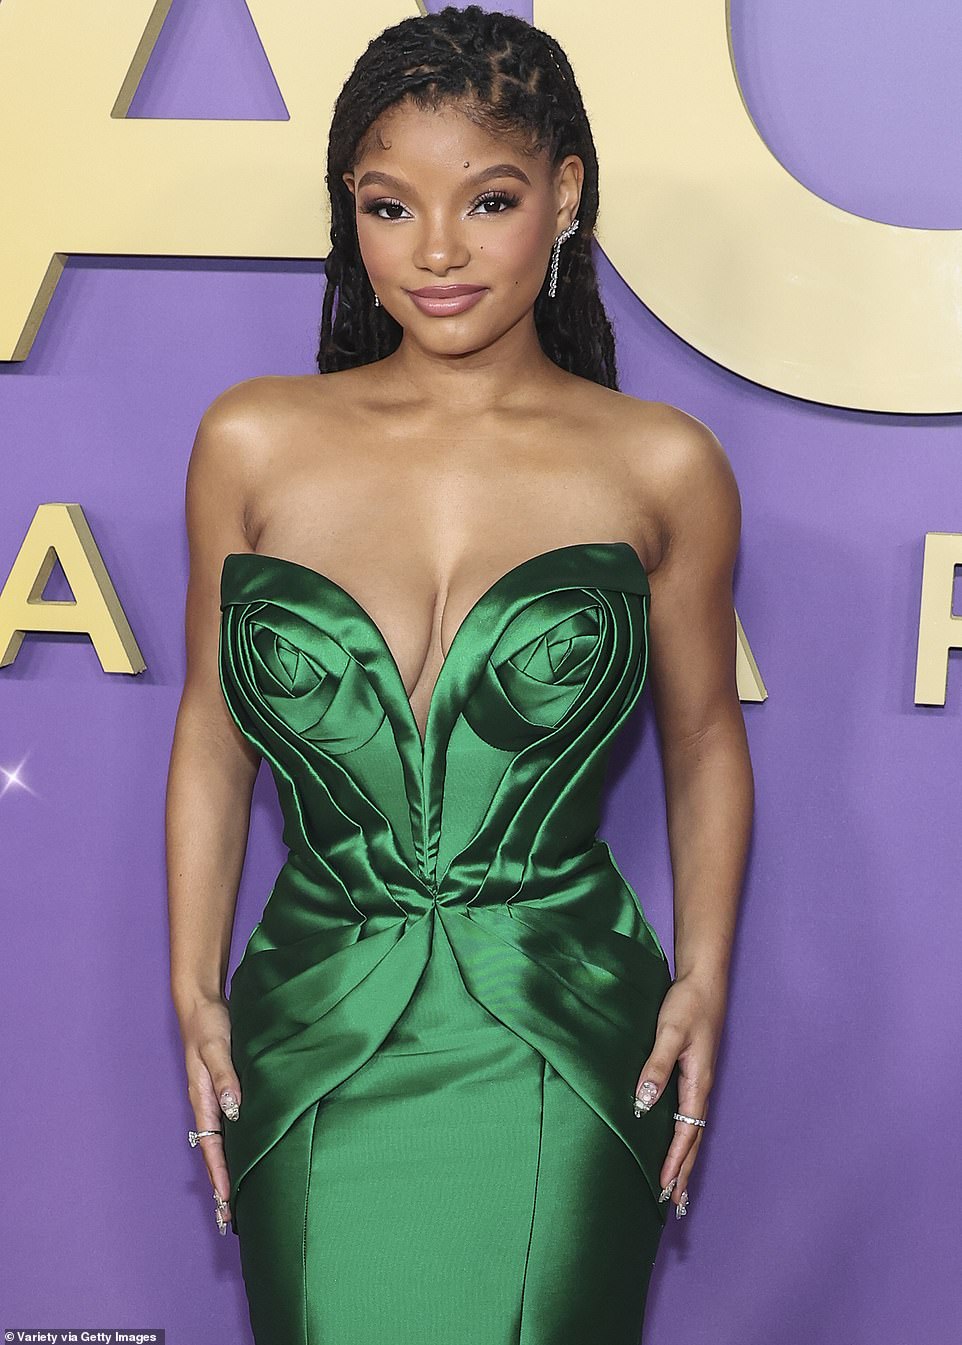 Halle, who is nominated for both Lead Actress in a Motion Picture via The Little Mermaid and Supporting Actress in a Motion Picture via The Color Purple, was radiant with showbiz glamor on the red carpet